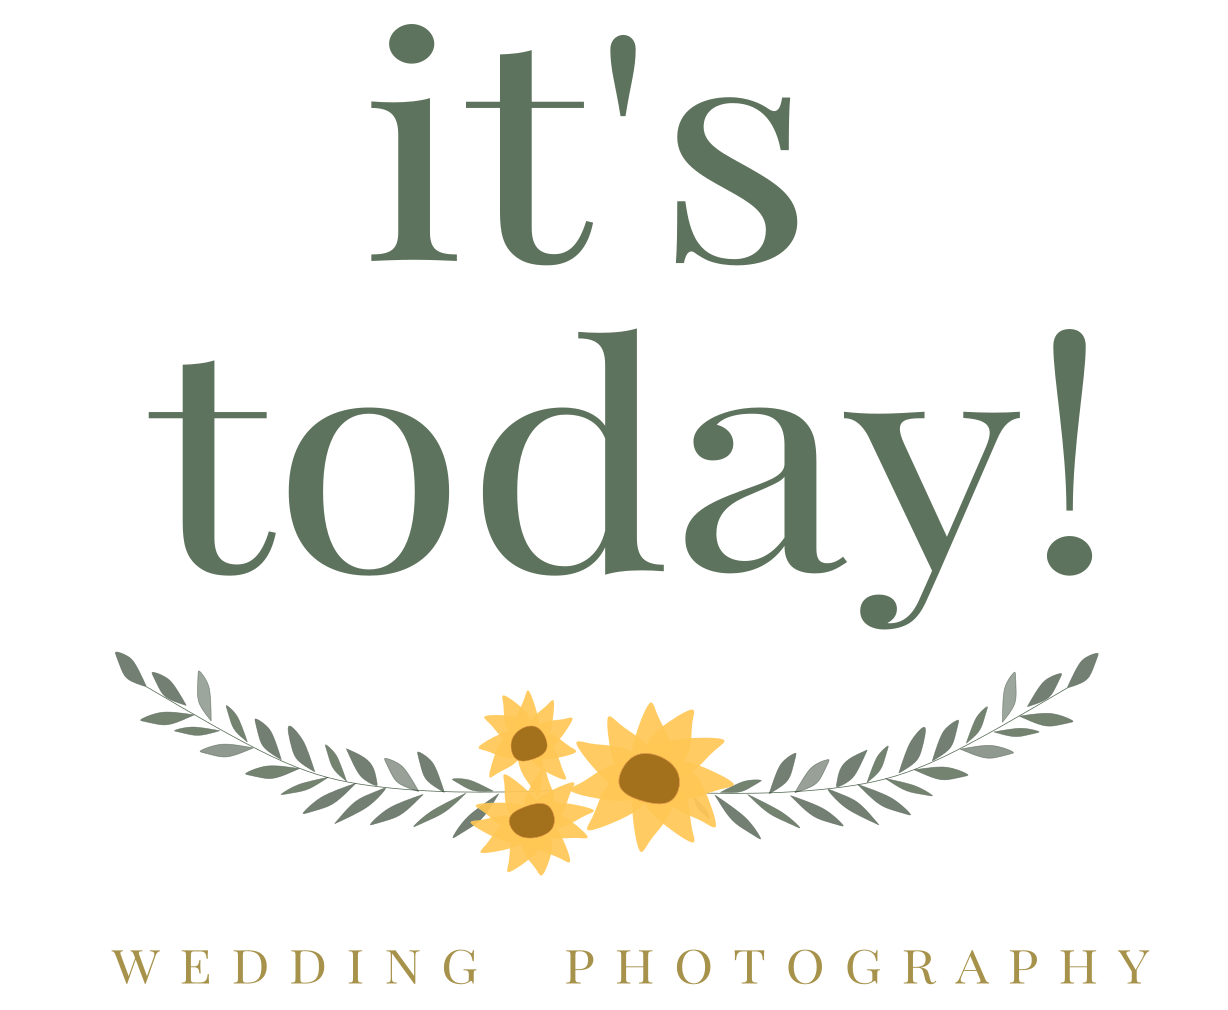 It’s today! wedding photography